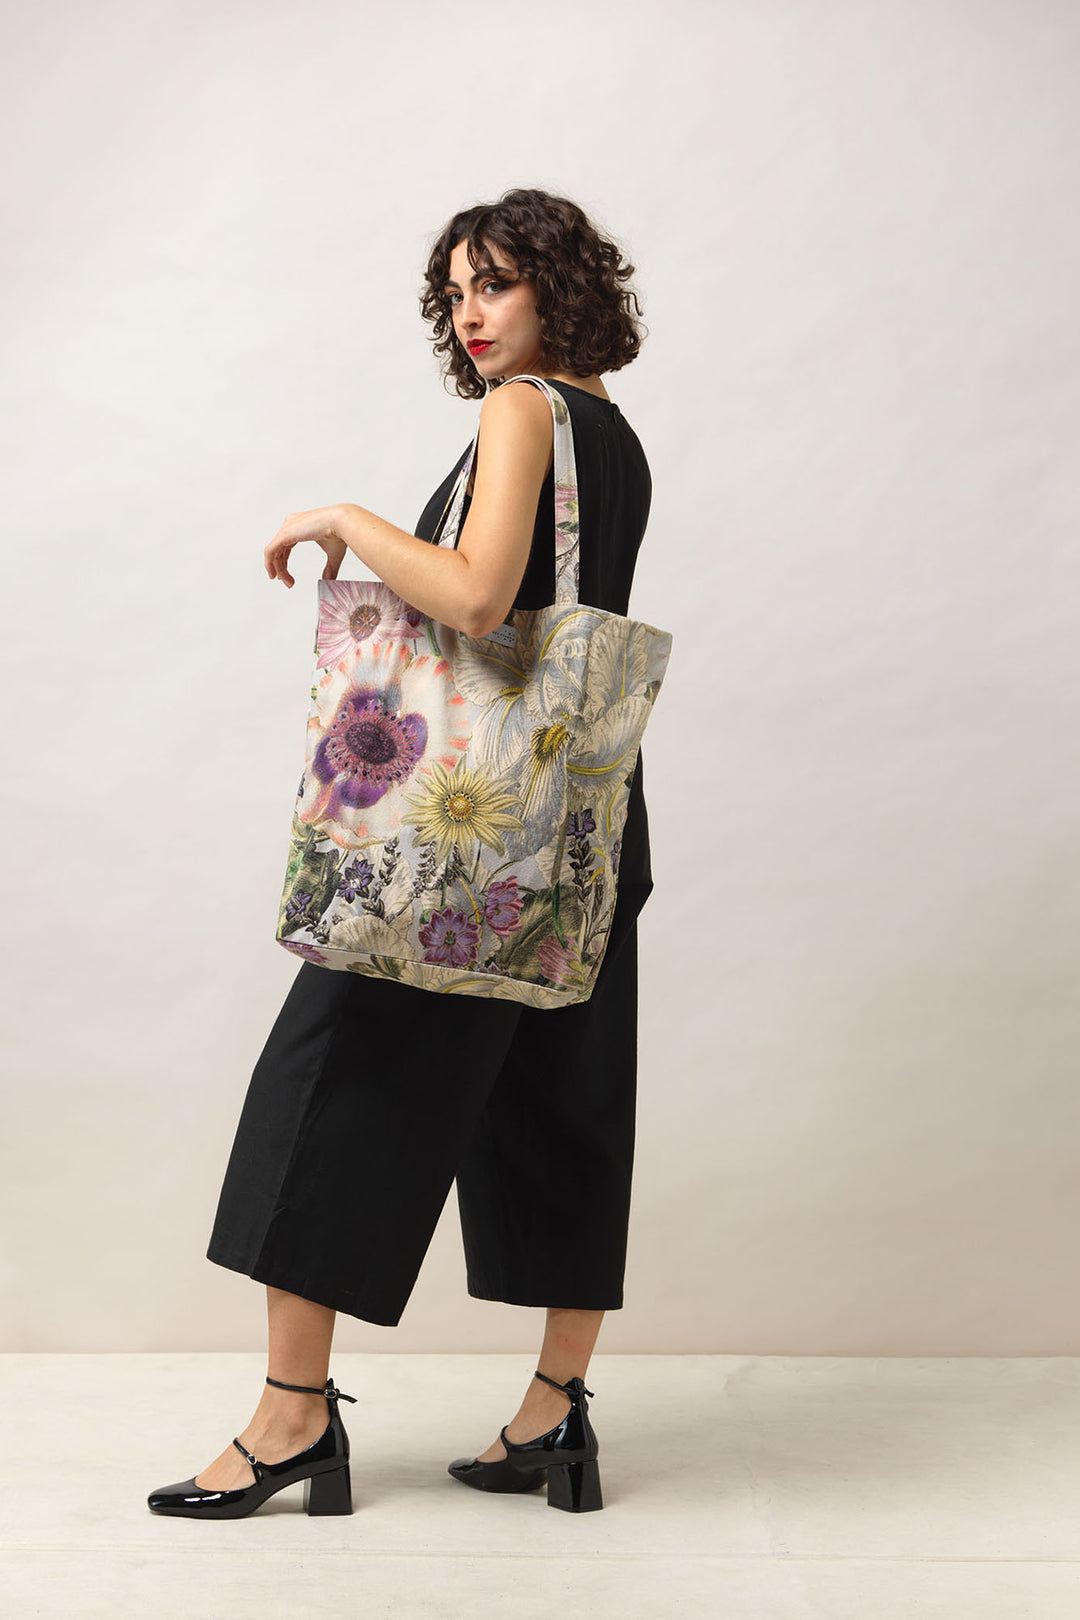 Women's accessories, gifts for her. Canvas tote bag, reusable and sustainable shopping bag or beach bag. floral daisy print in stone by One Hundred Stars